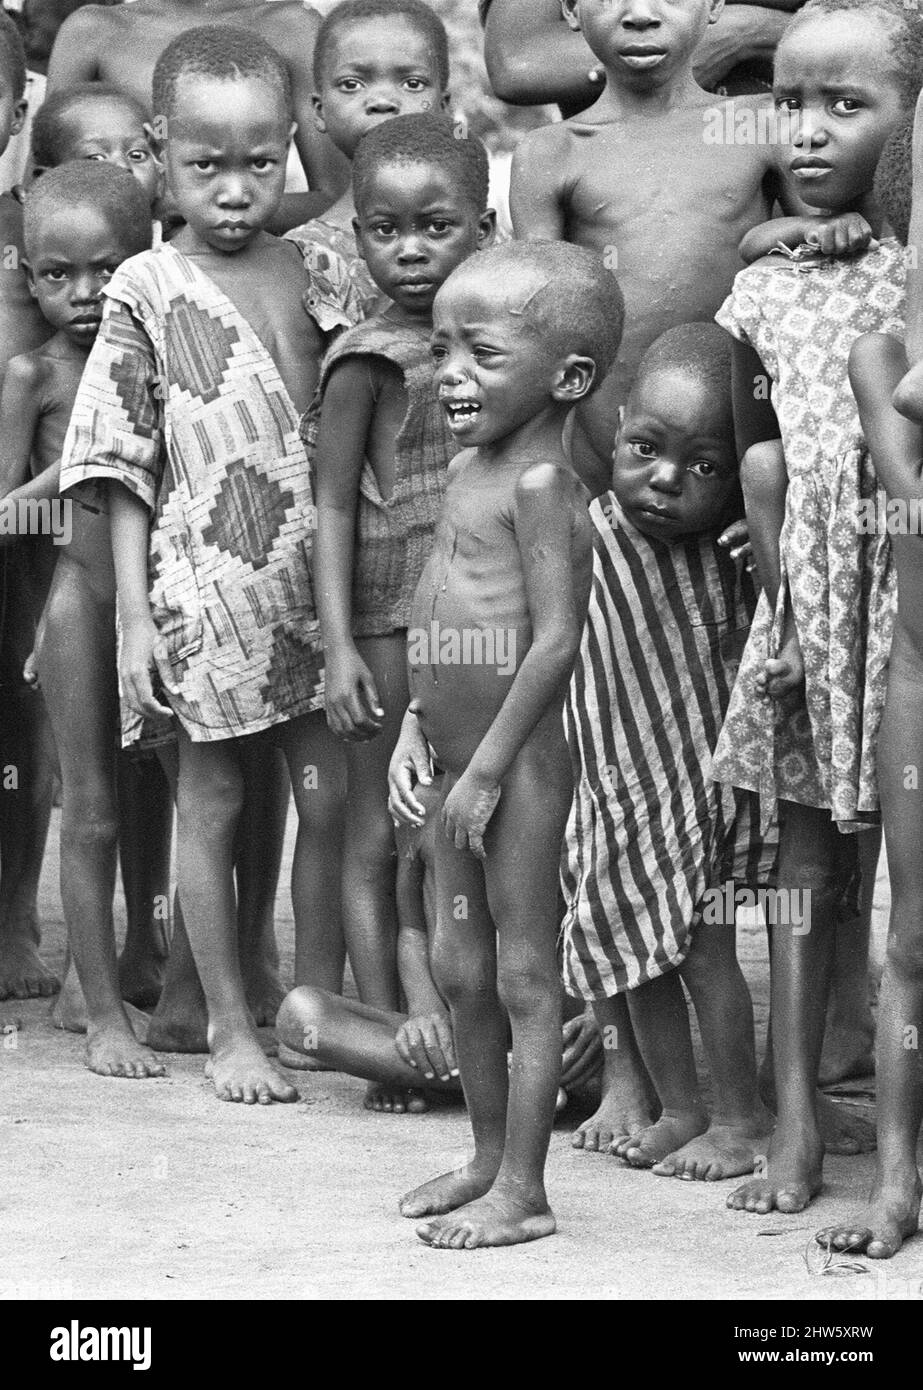 Starving children at the Queen Elizabeth Hospital, Umuahia just a few of the estimated one to two million victims of the Biafran War. 23rd June 1968The Nigerian Civil War, also known as the Biafran War endured for two and a half years, from  6 July 1967 to 15 January 1970, and was fought to counter the secession of Biafra from Nigeria. The indigenous Igbo people of Biafra felt they could no longer co-exist with the Northern-dominated federal government following independence from Great Britain. Political, economic, ethnic, cultural and religious tensions finally boiled over into civil war foll Stock Photo